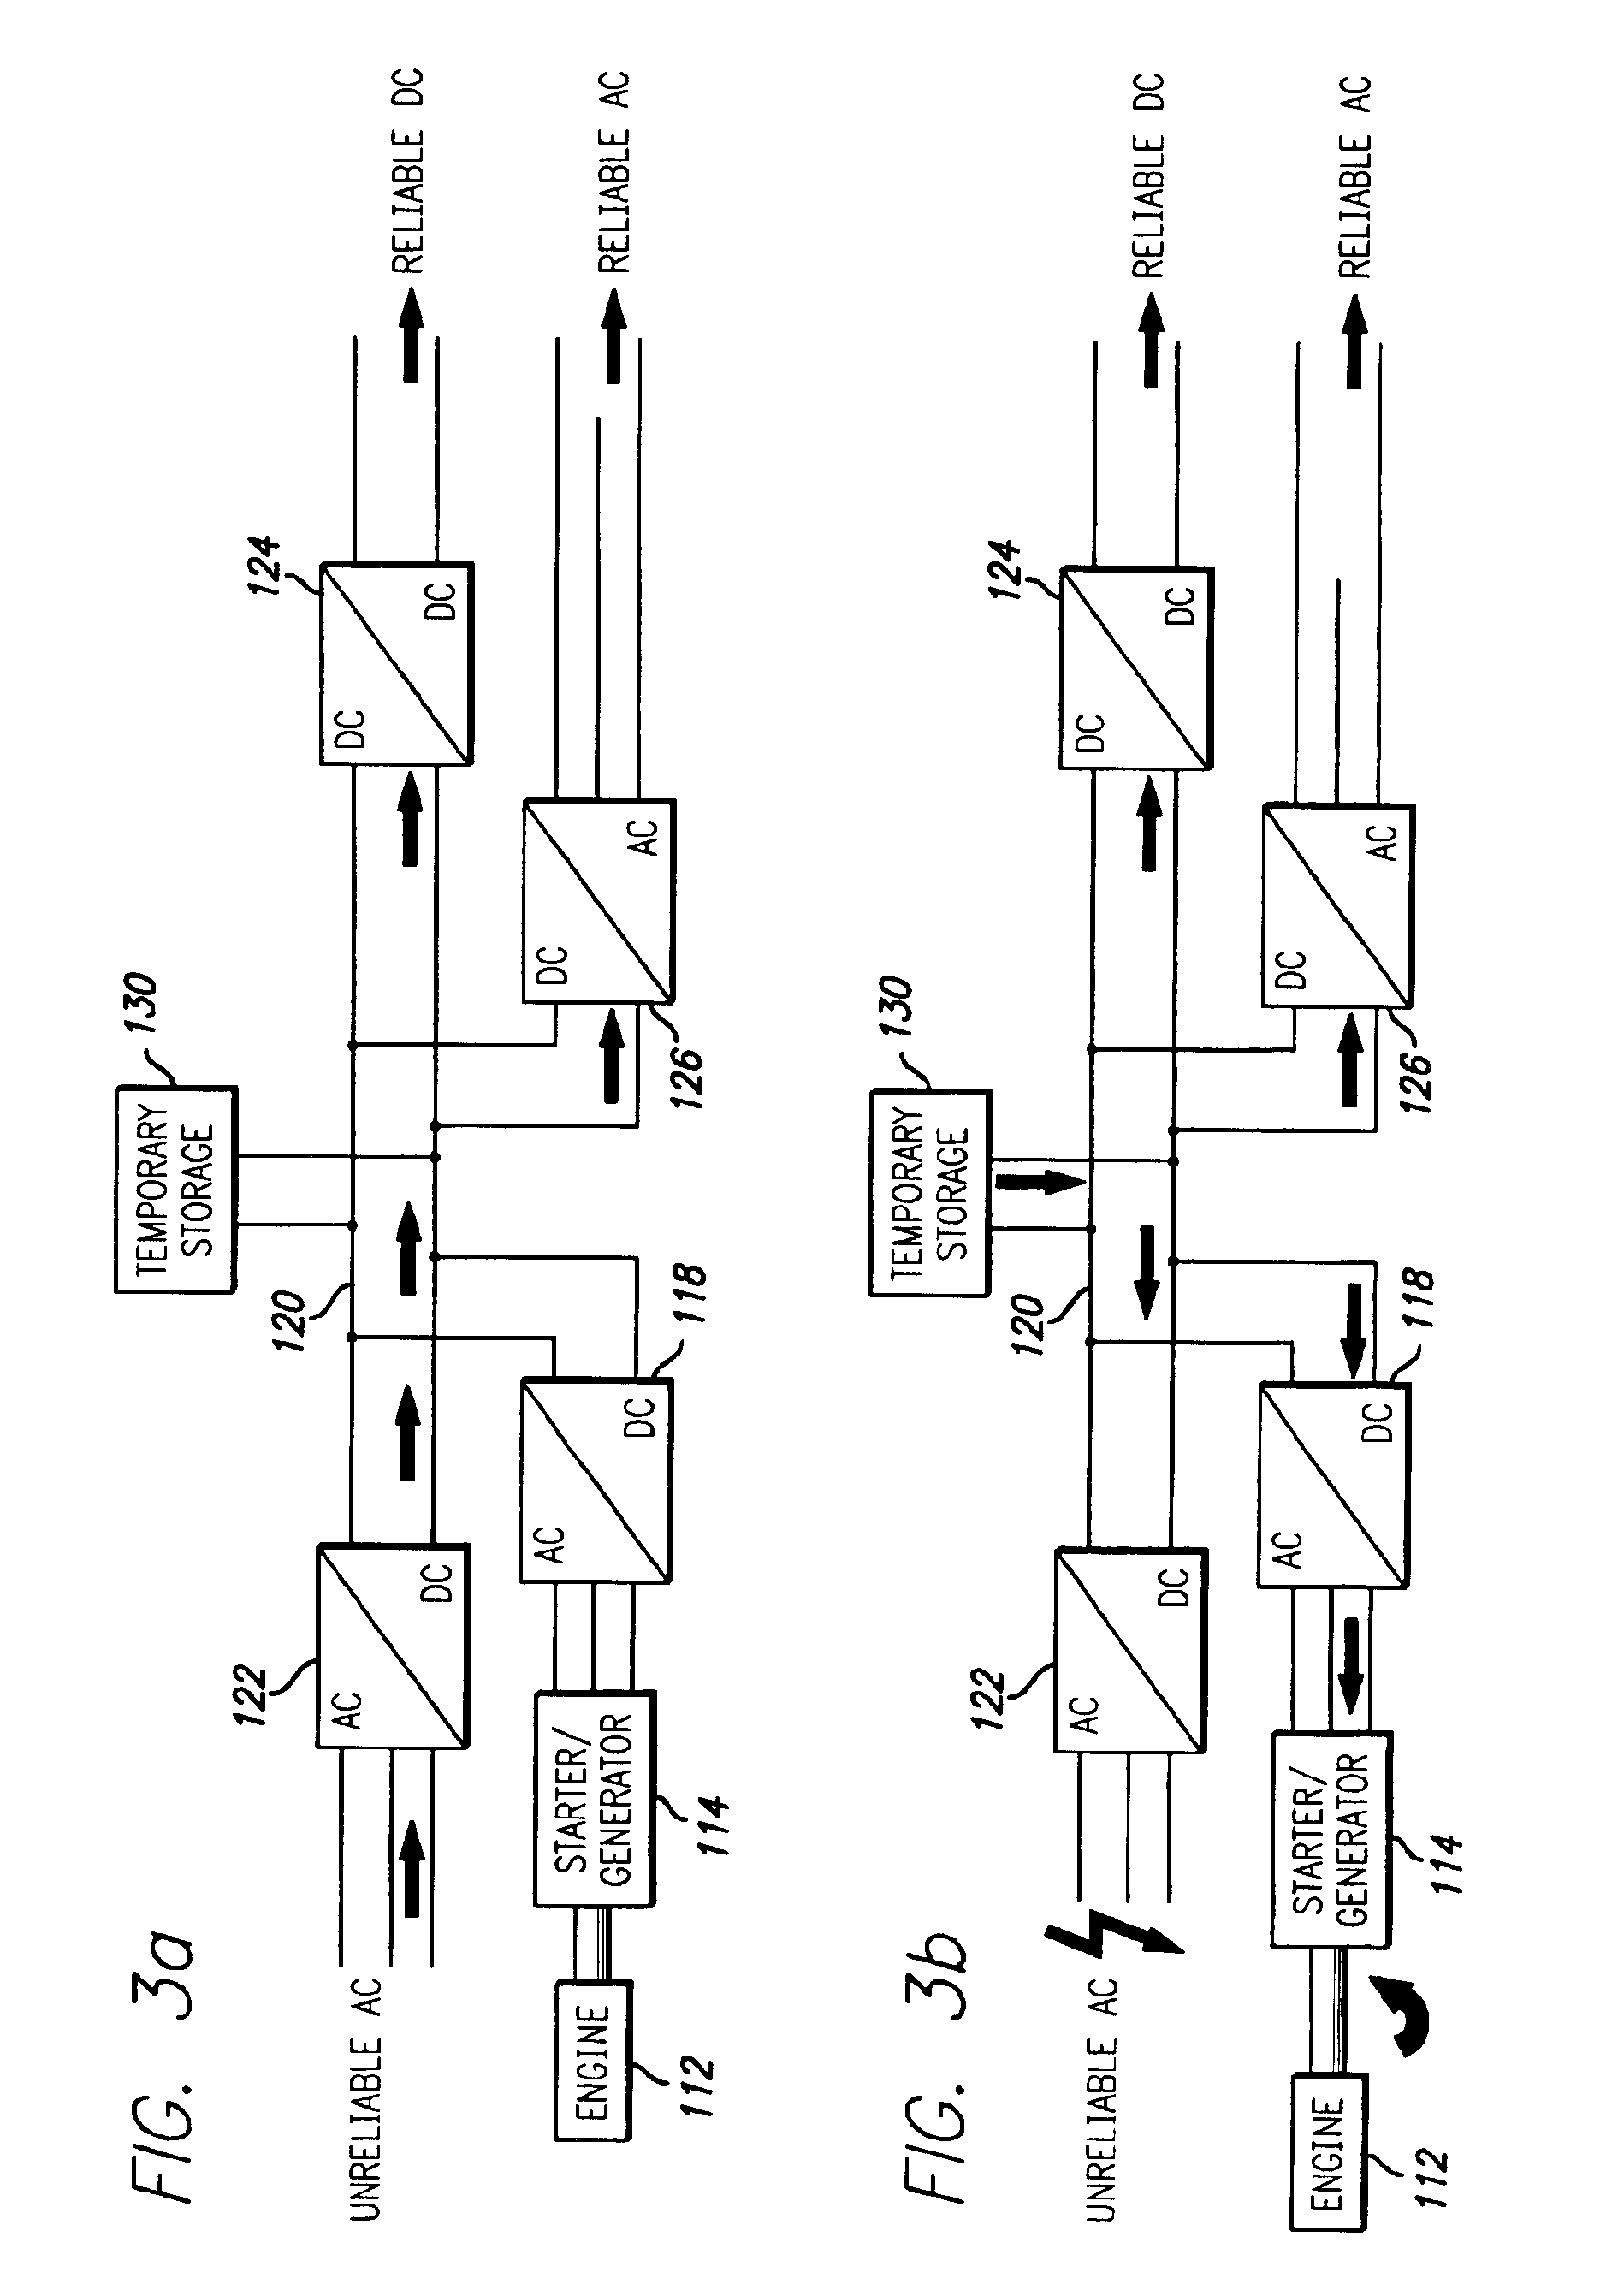 Fuel control system and method for distributed power generation, conversion, and storage system